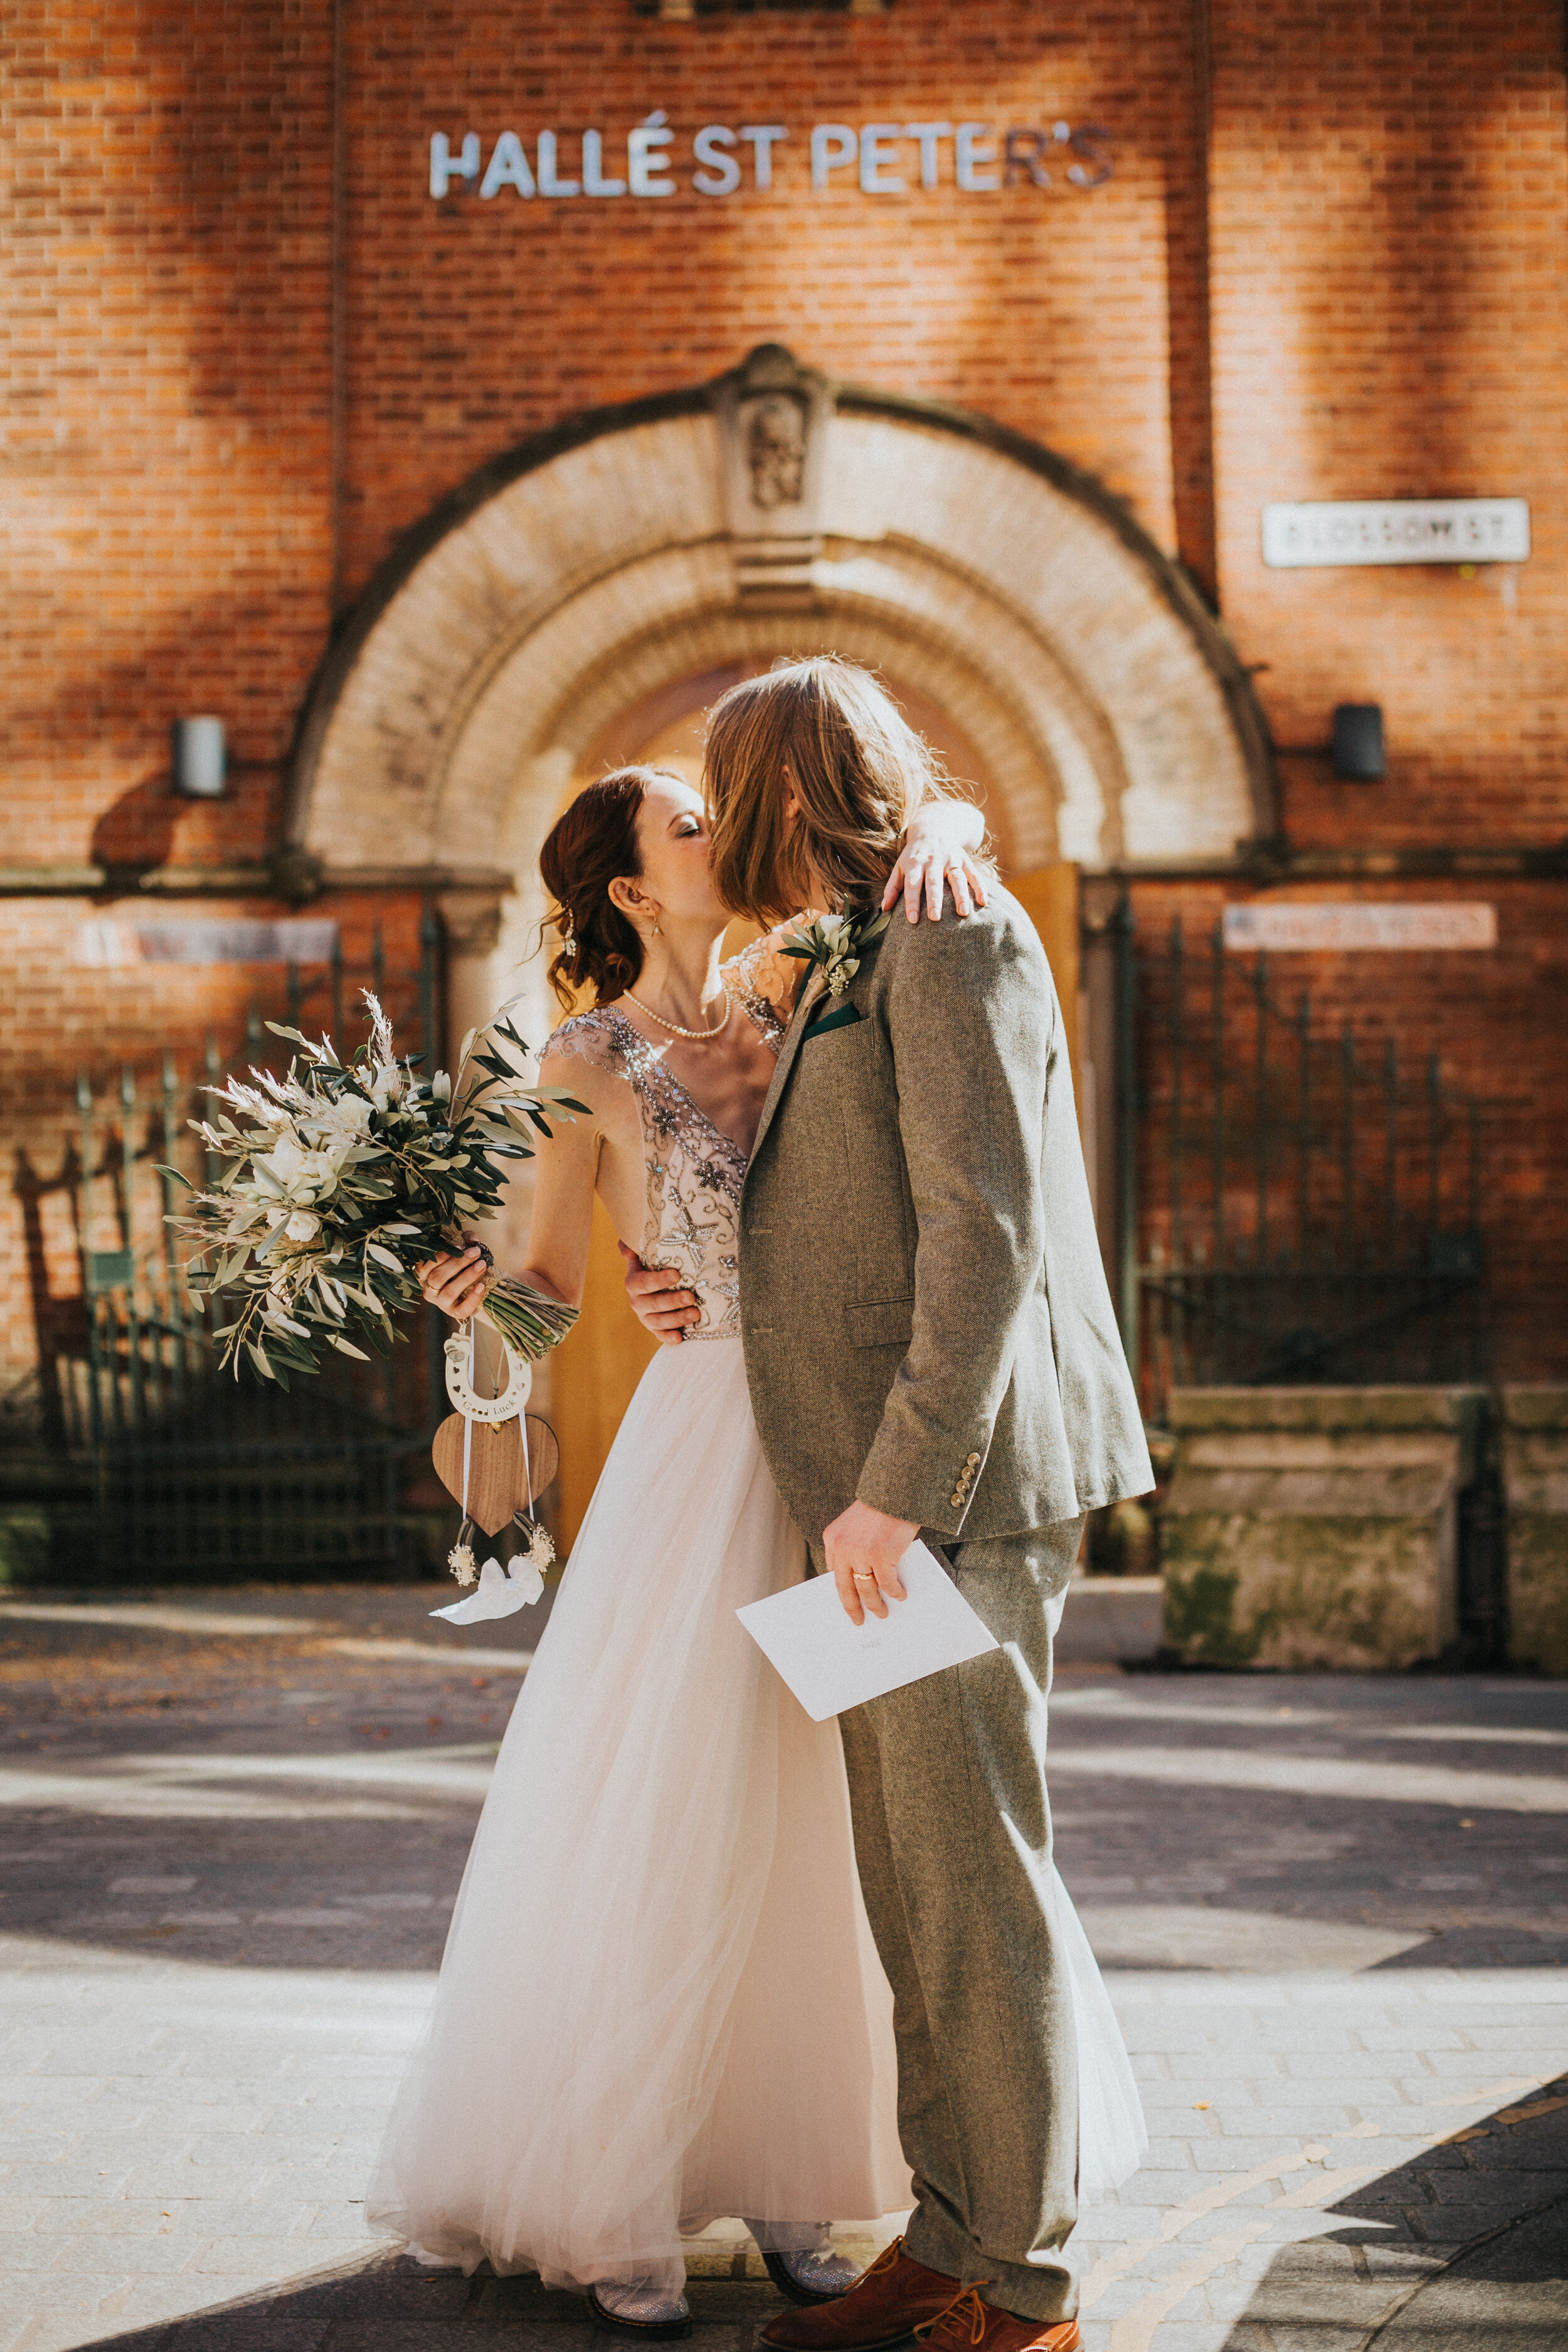 Bride and Groom kiss outside Halle, St Peter's, Manchester in the sunshine on their wedding day. 